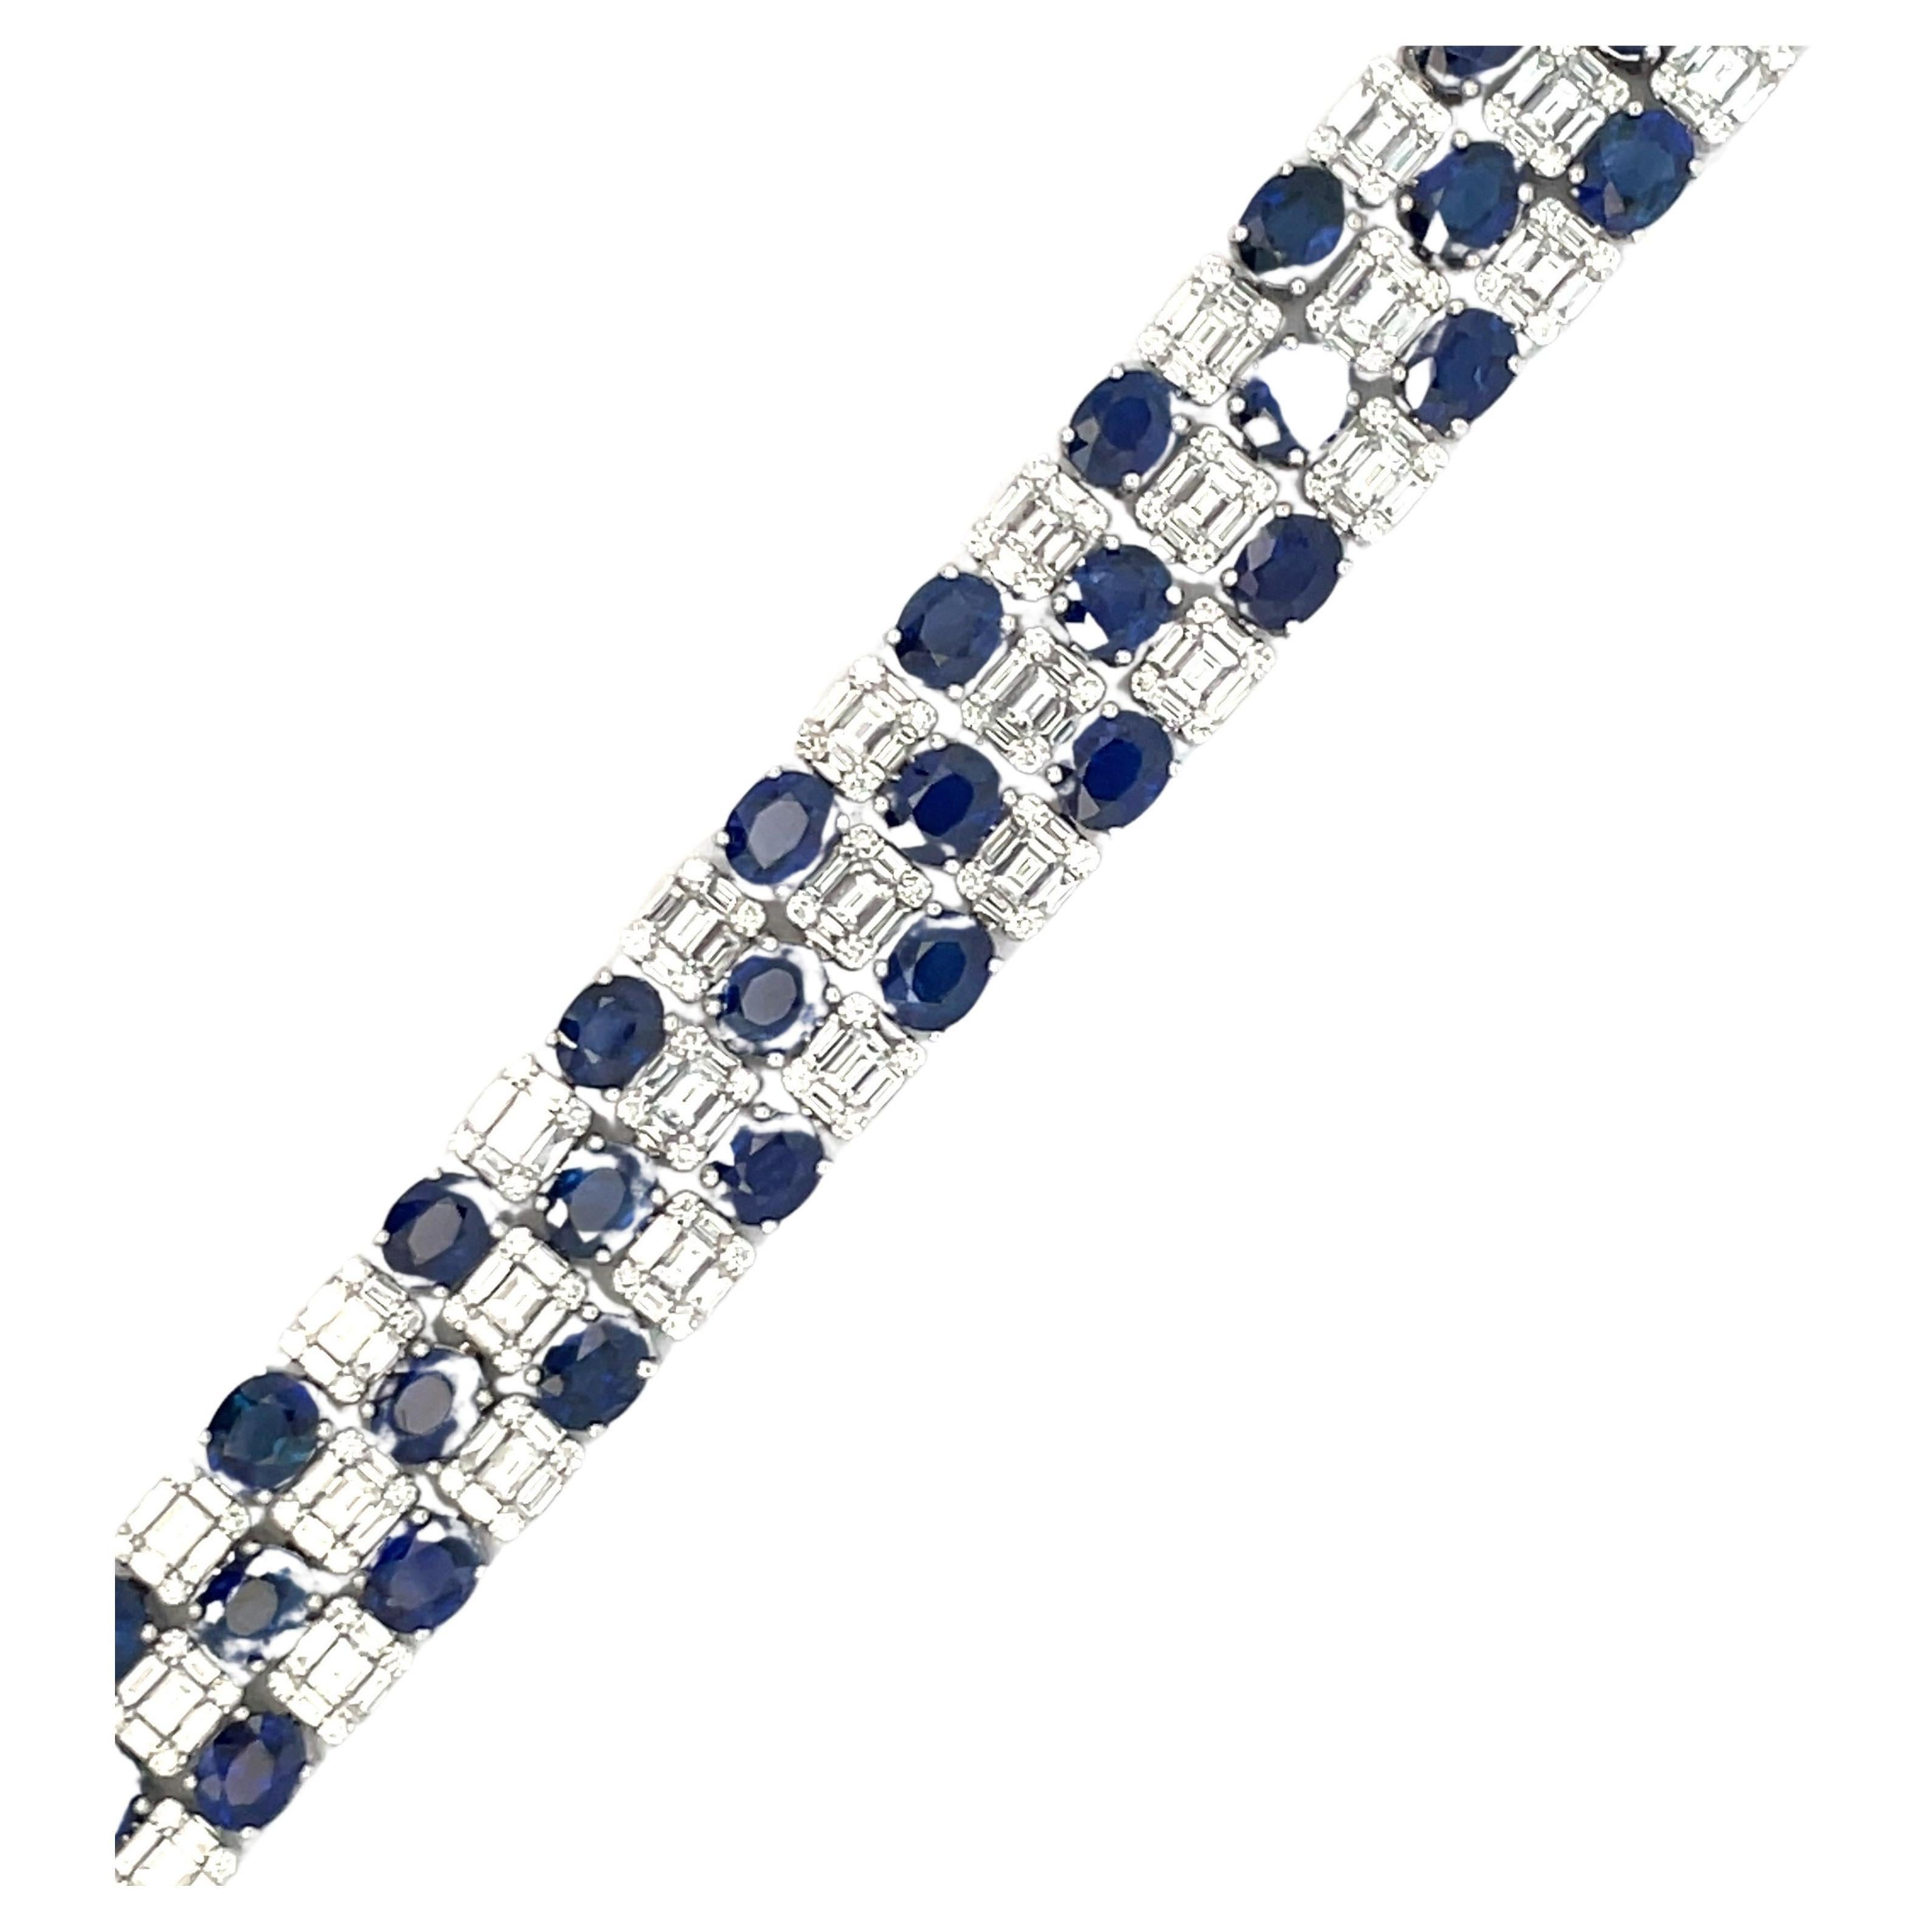 Fifty oval cut blue Sapphires weighing 24.02 Carats with alternating illusion style diamonds containing 234 round brilliants 1.49 carats and 250 baguettes weighing 6.16 carats, 18 Karat White Gold. 